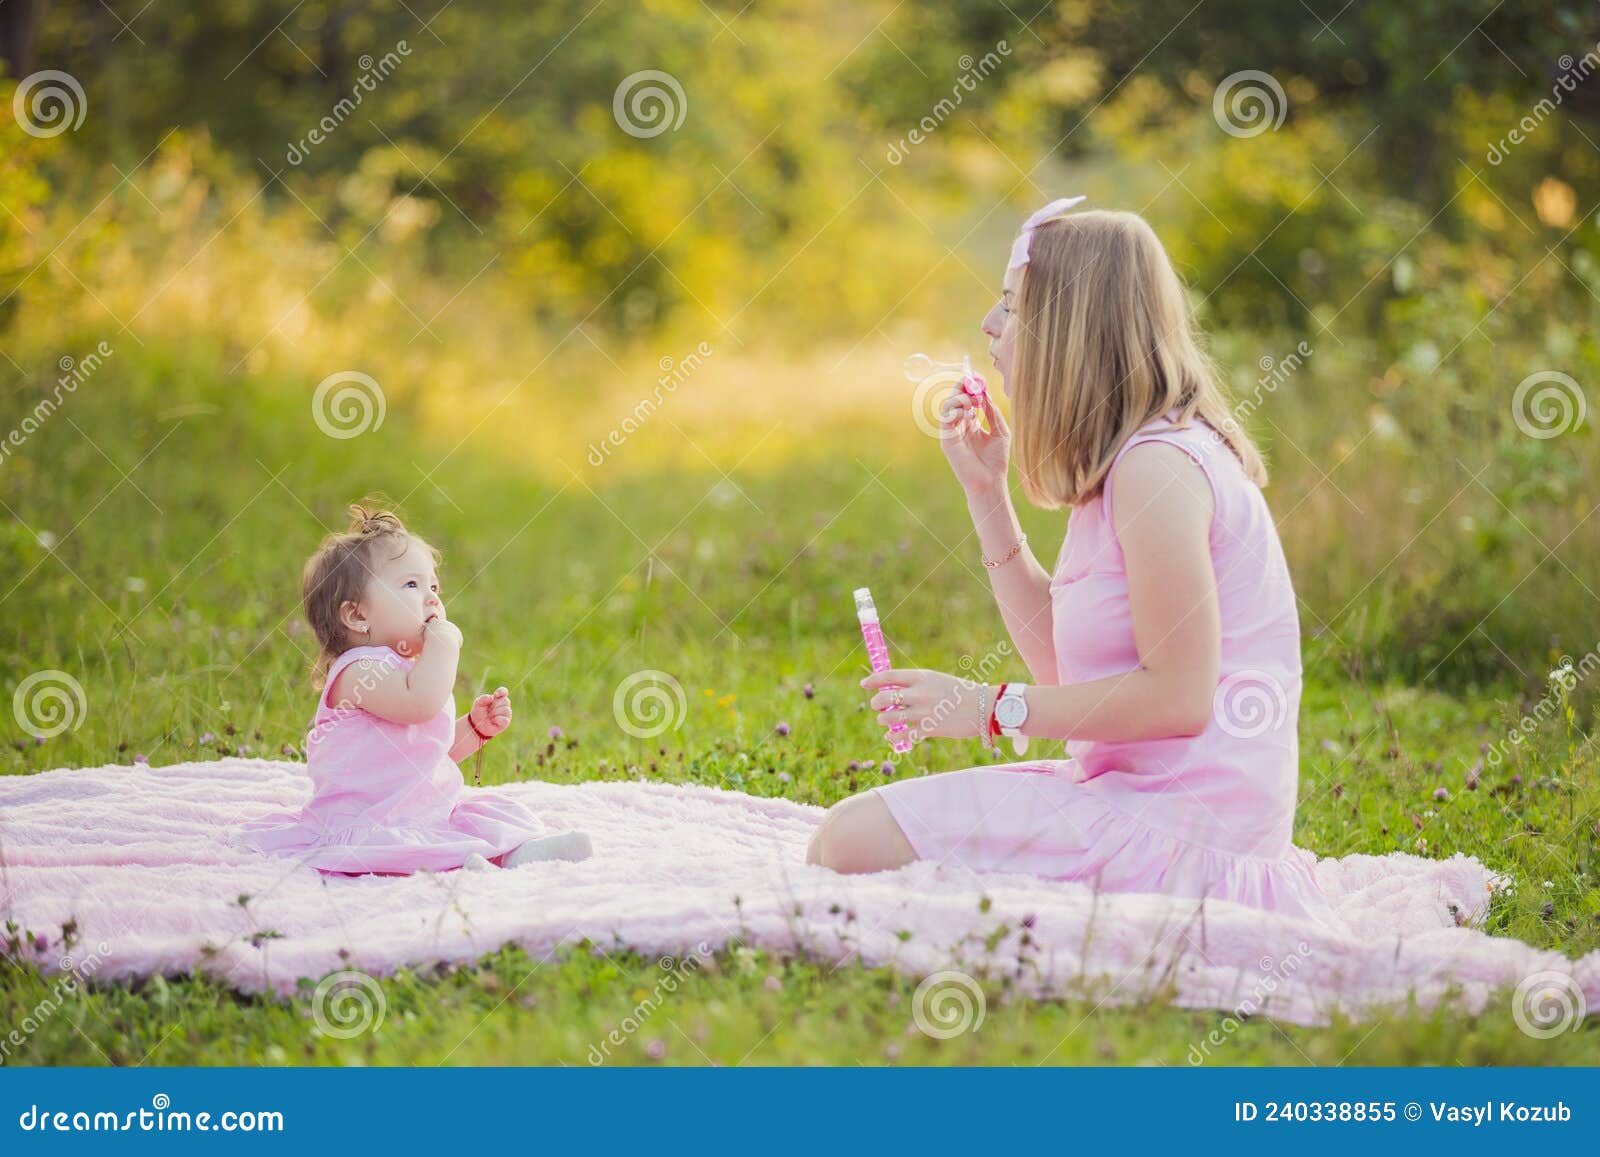 Mother And Daughter Blowing Bubbles Stock Image Image Of Blow Woman